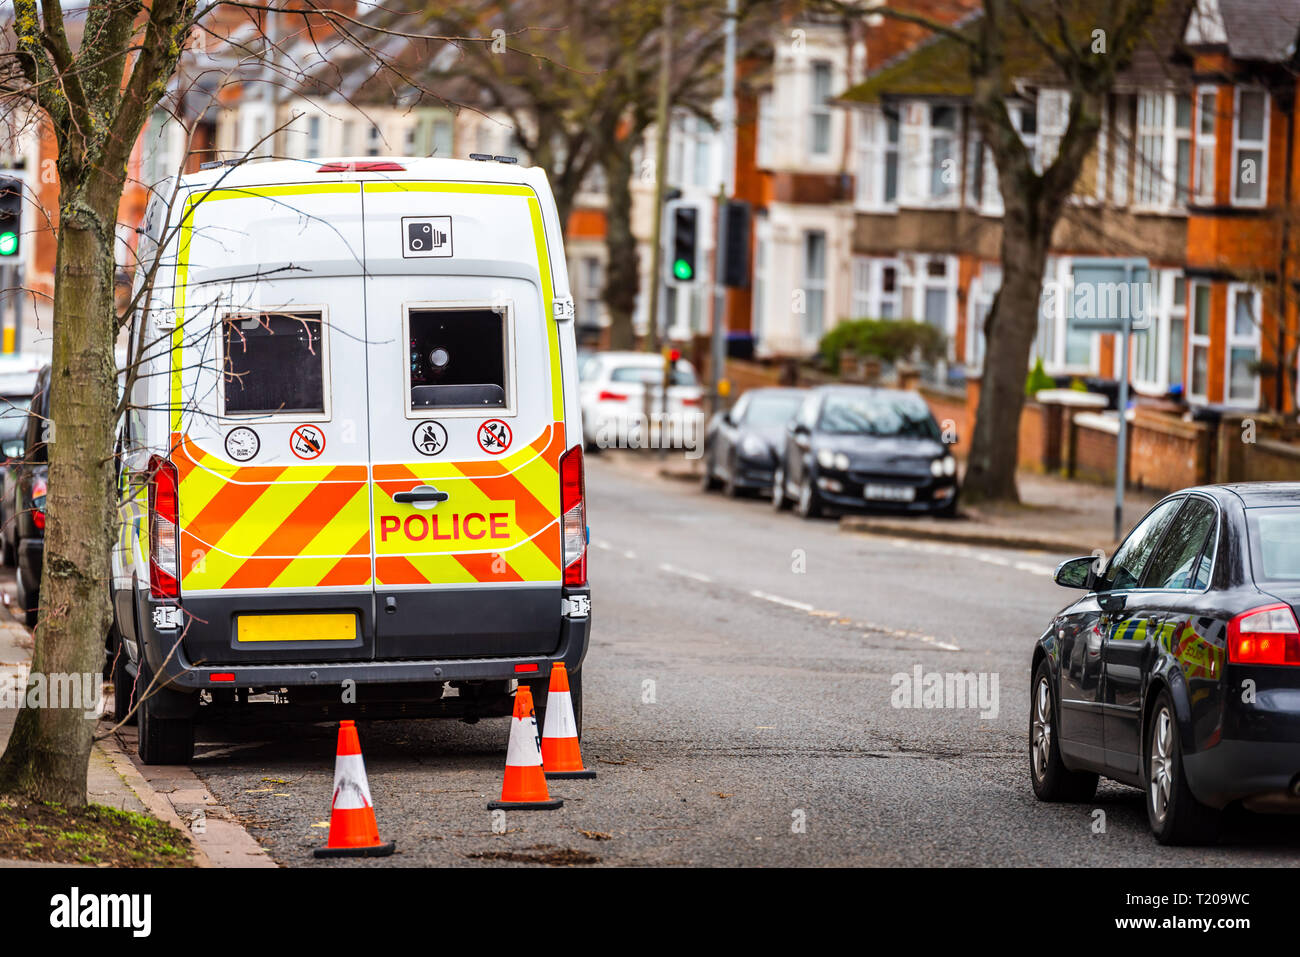 Speed Camera Van High Resolution Stock Photography and Images - Alamy